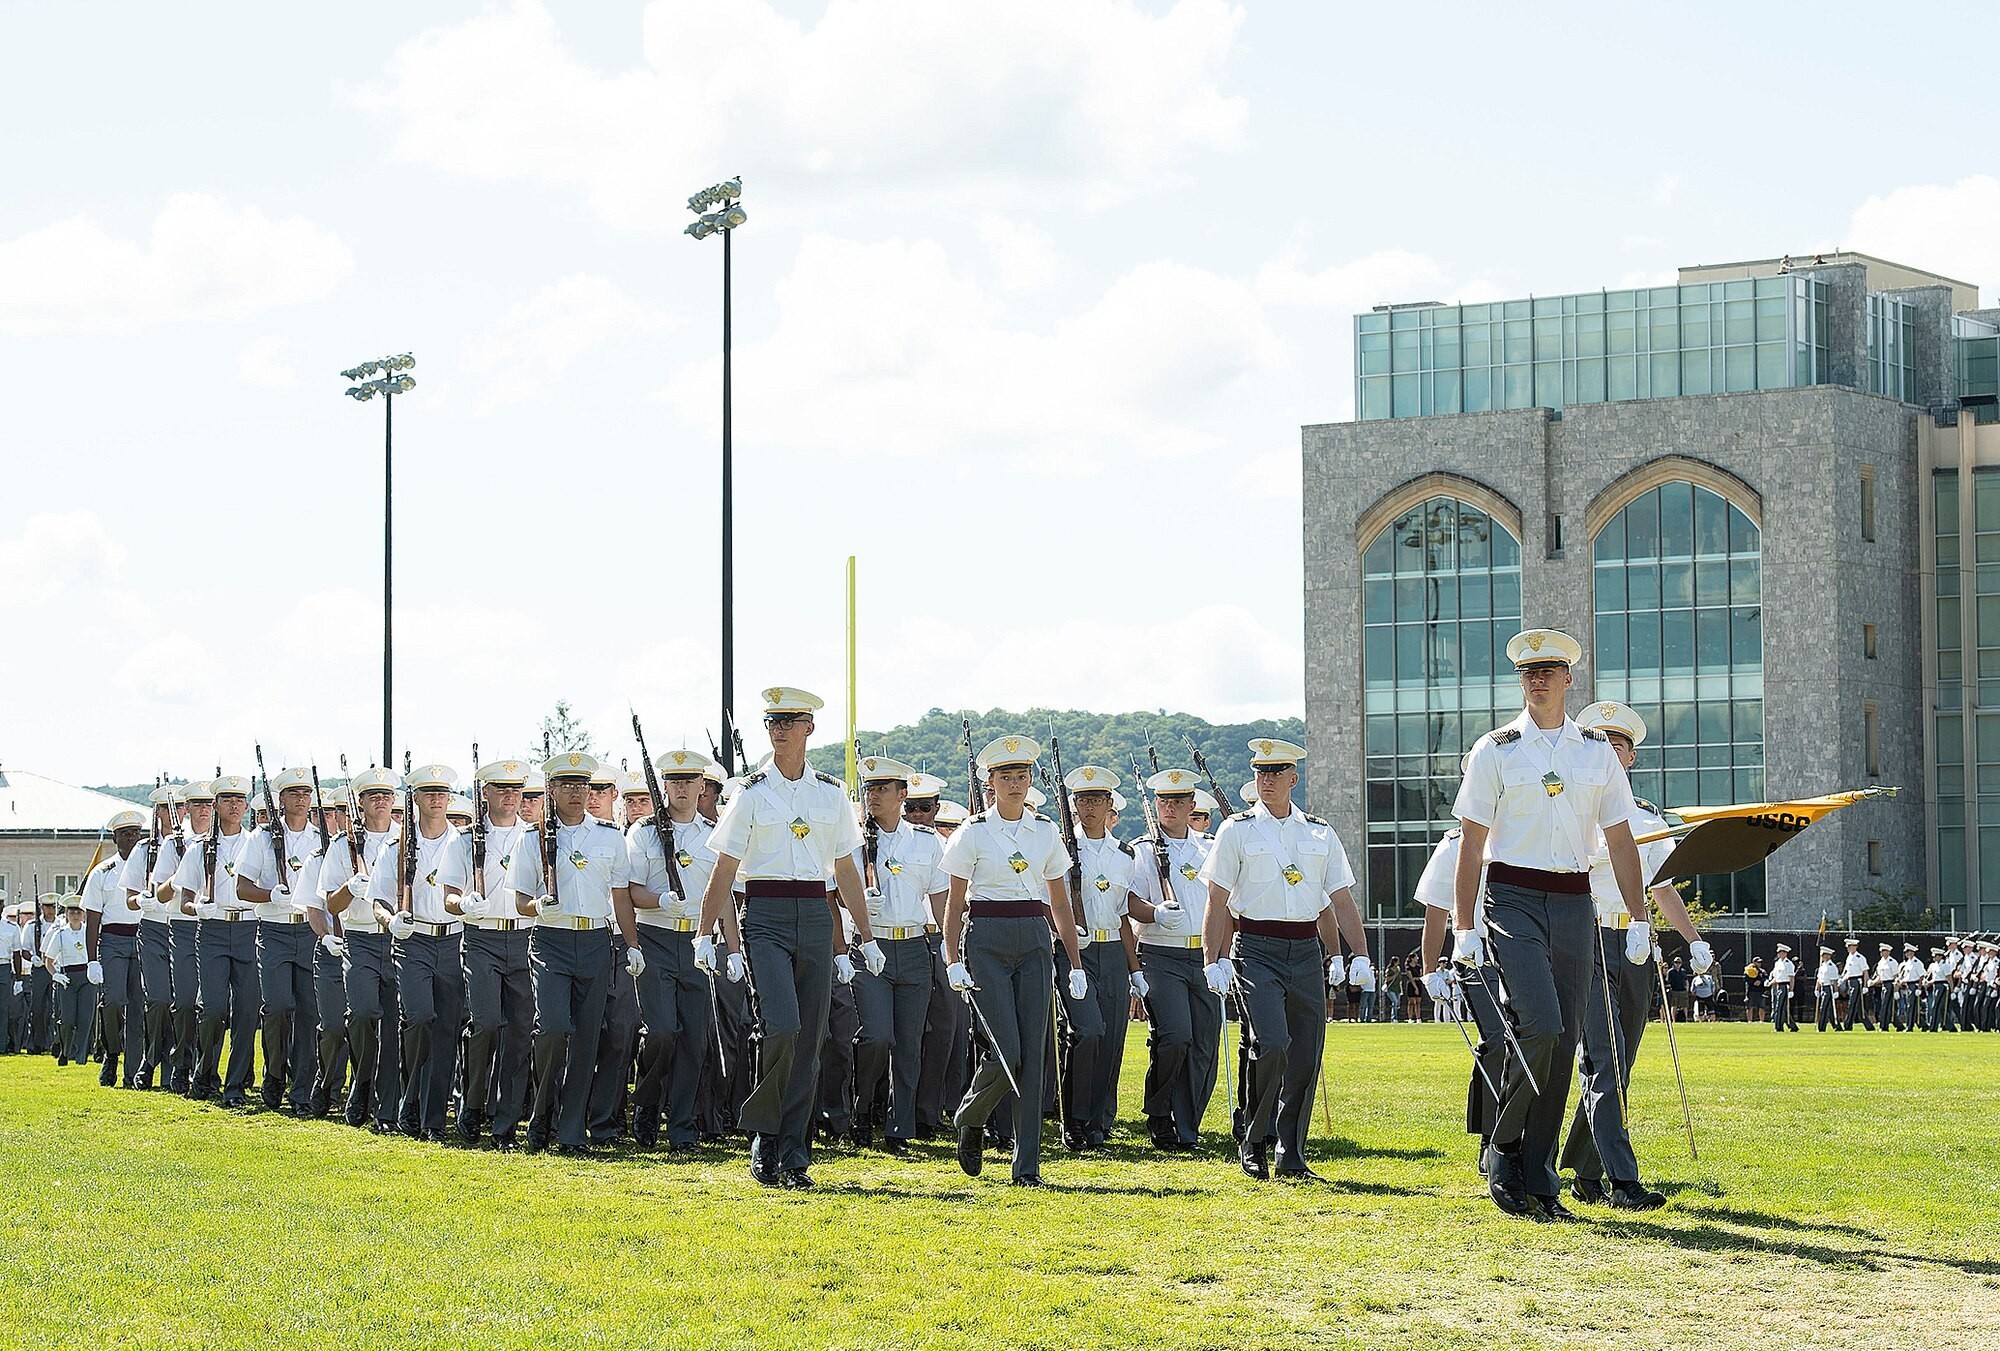 class-of-2026-cadets-rejoice-during-a-day-parade-article-the-united